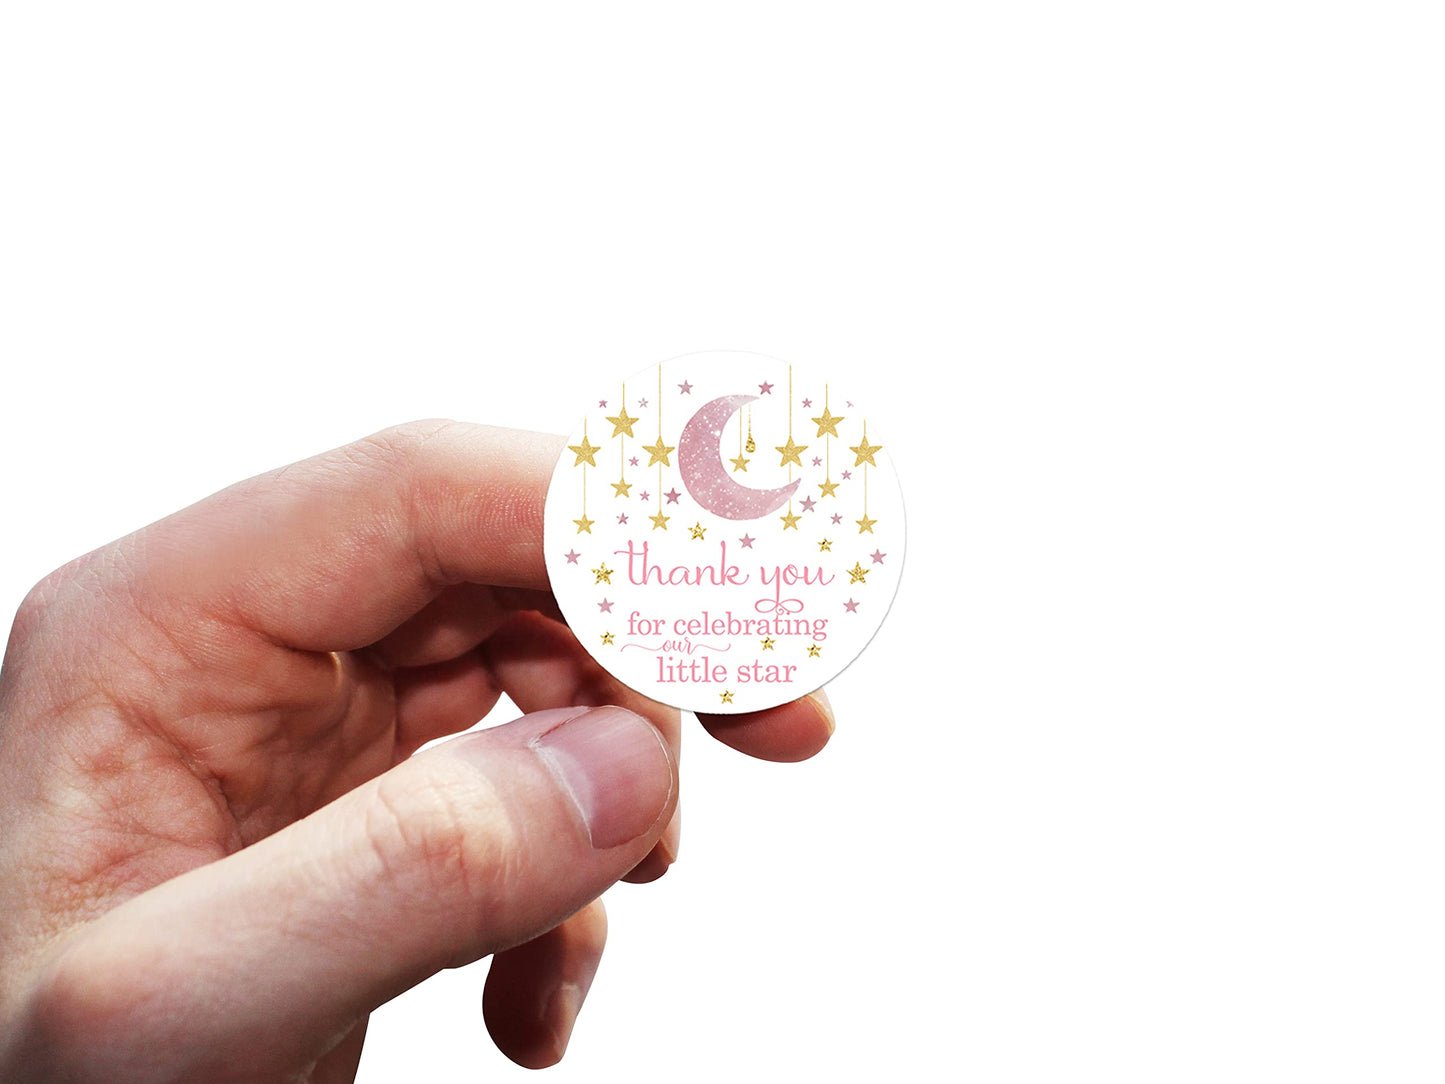 Star Stickers Girls Baby Shower Party Favors PinkPaper Clever Party